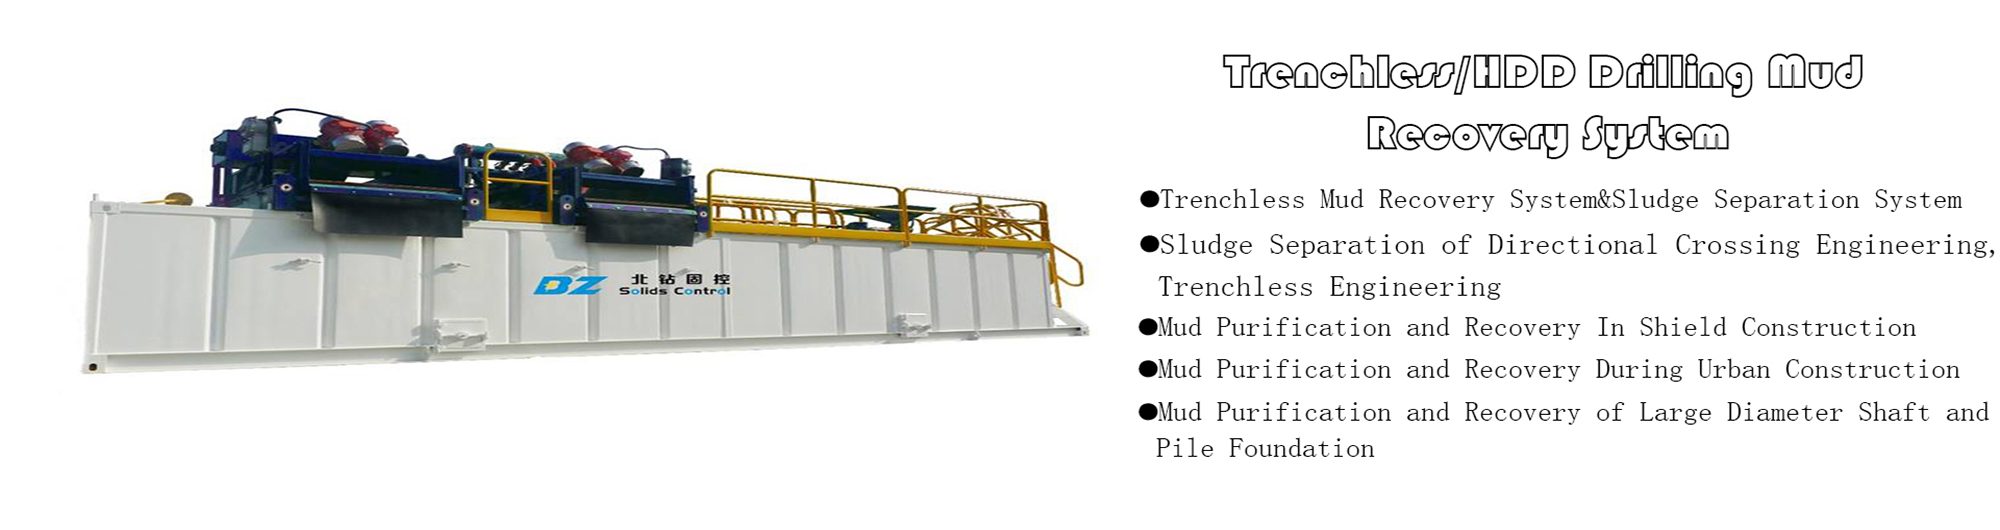 Trenchless Drilling Mud Recycling System